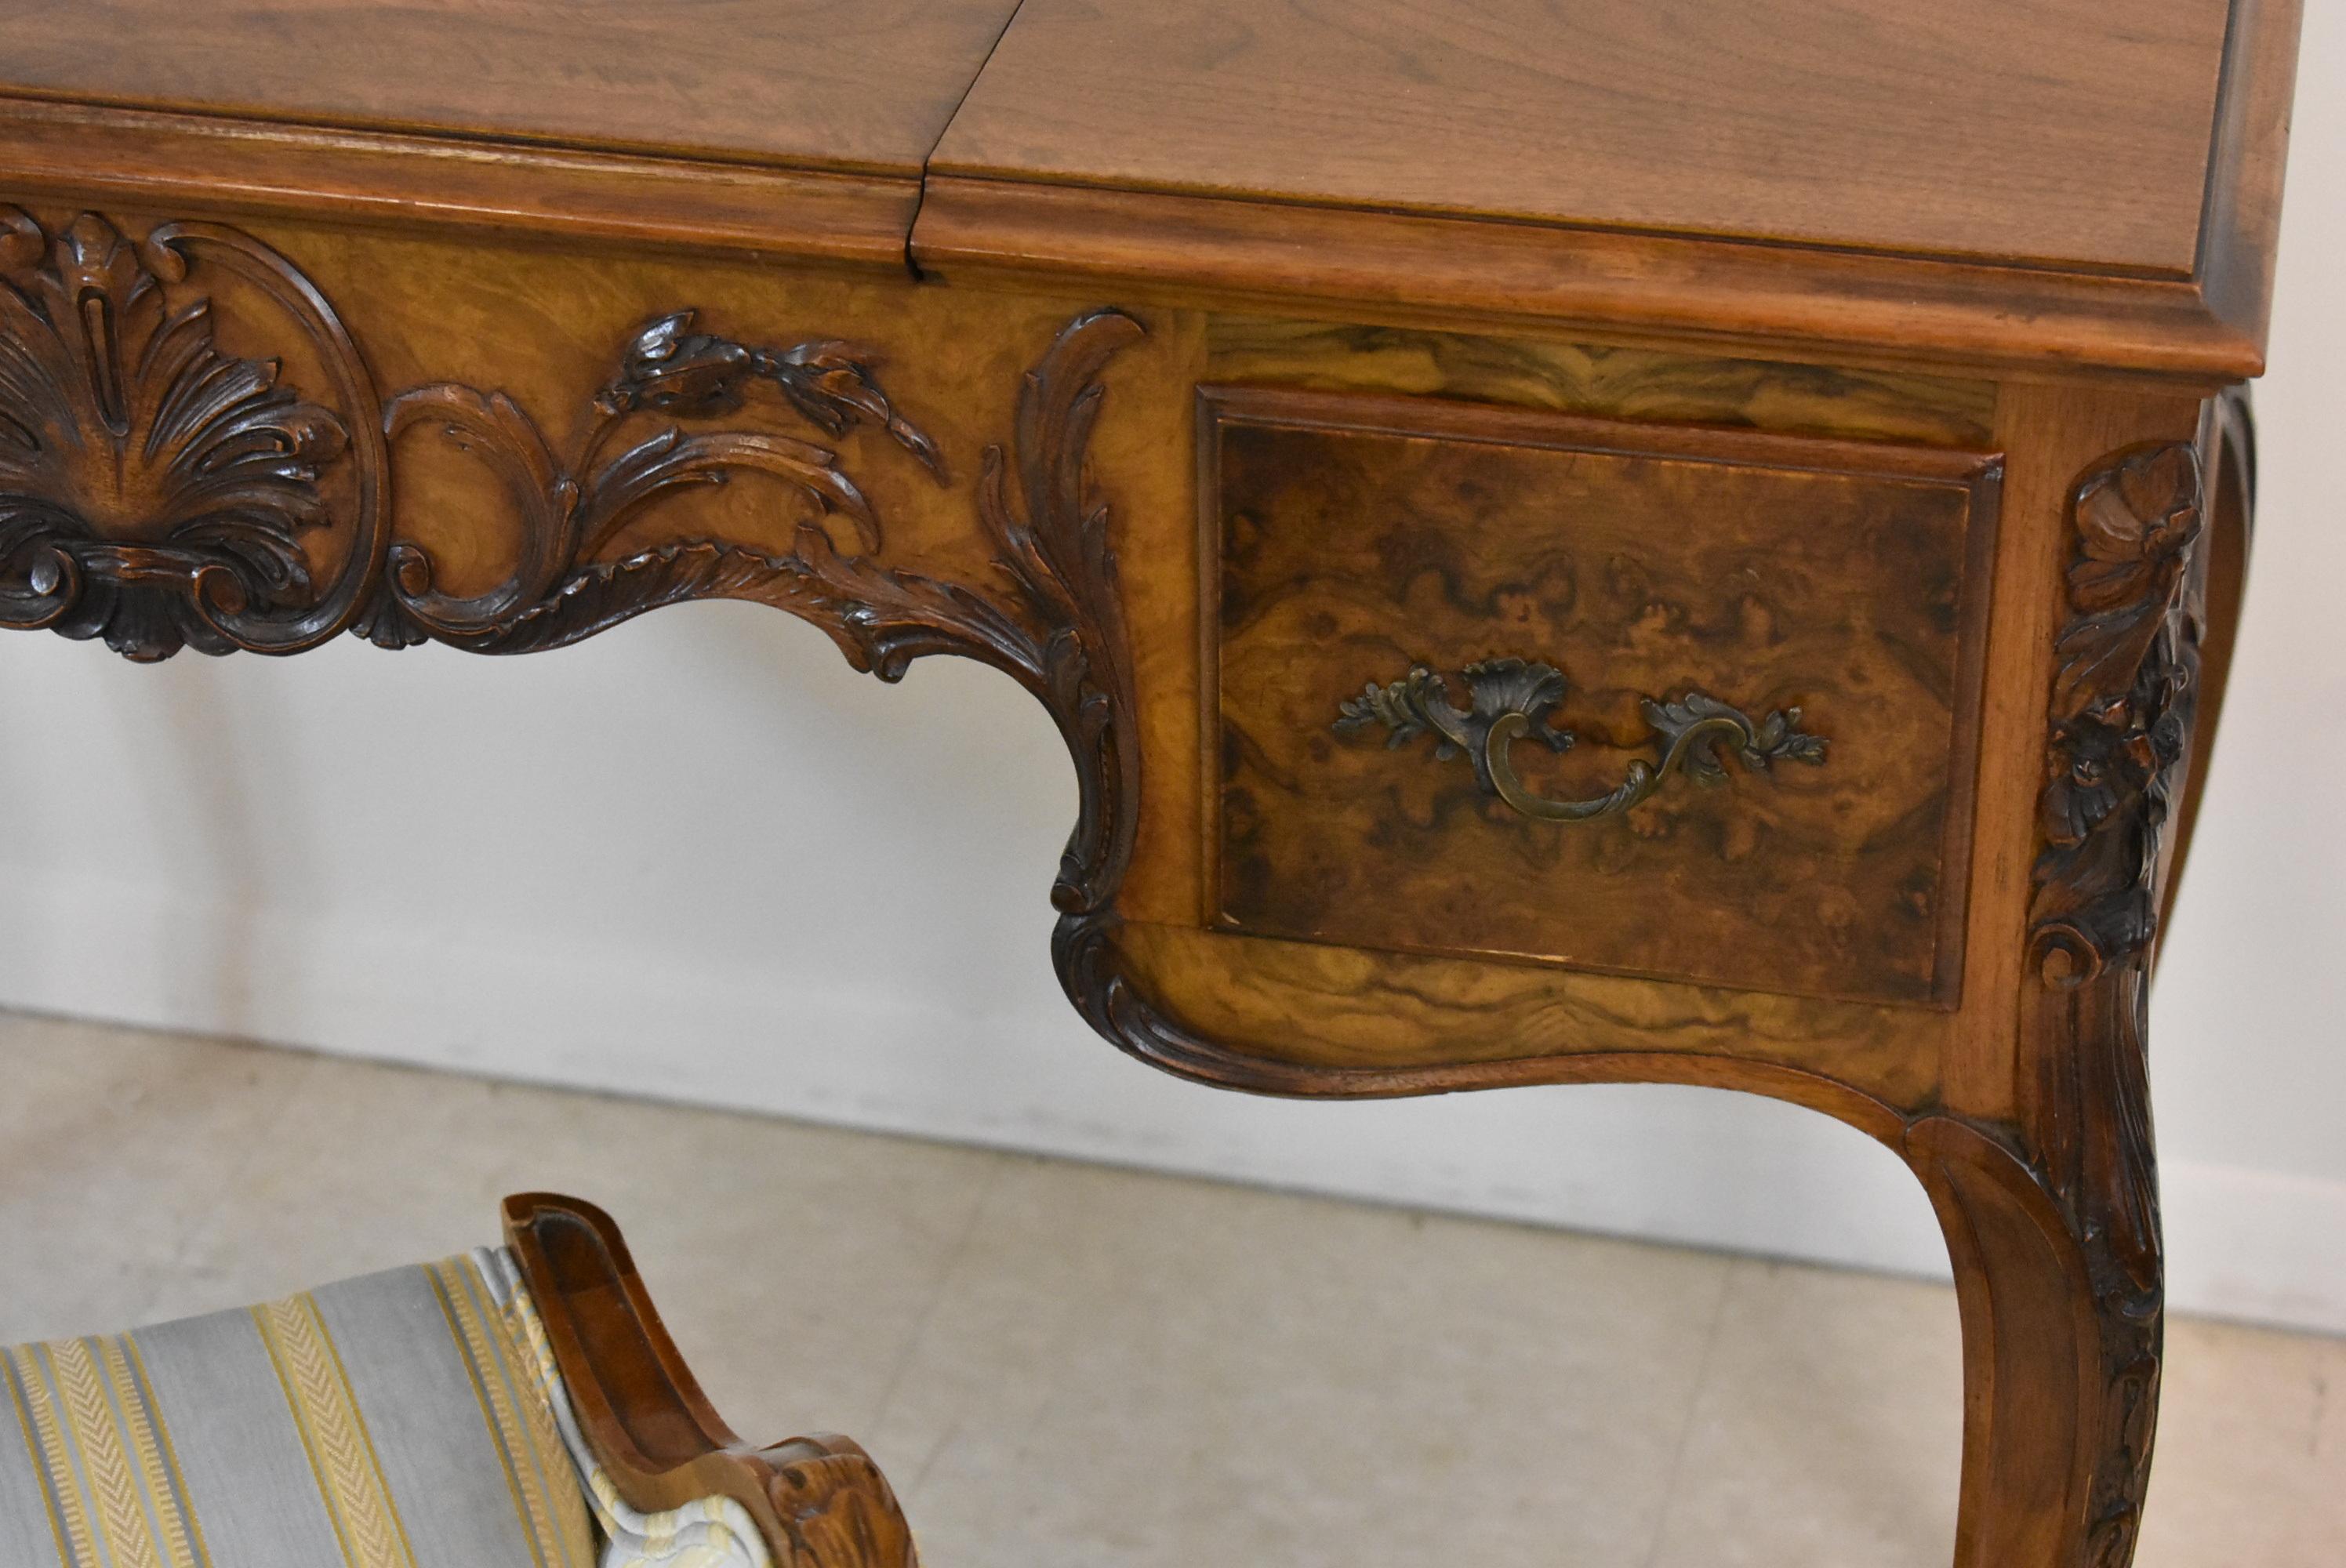 Louis XV French style walnut dressing / vanity table with chair by Irwin Furniture, circa 1920s. Two dove tail drawers.